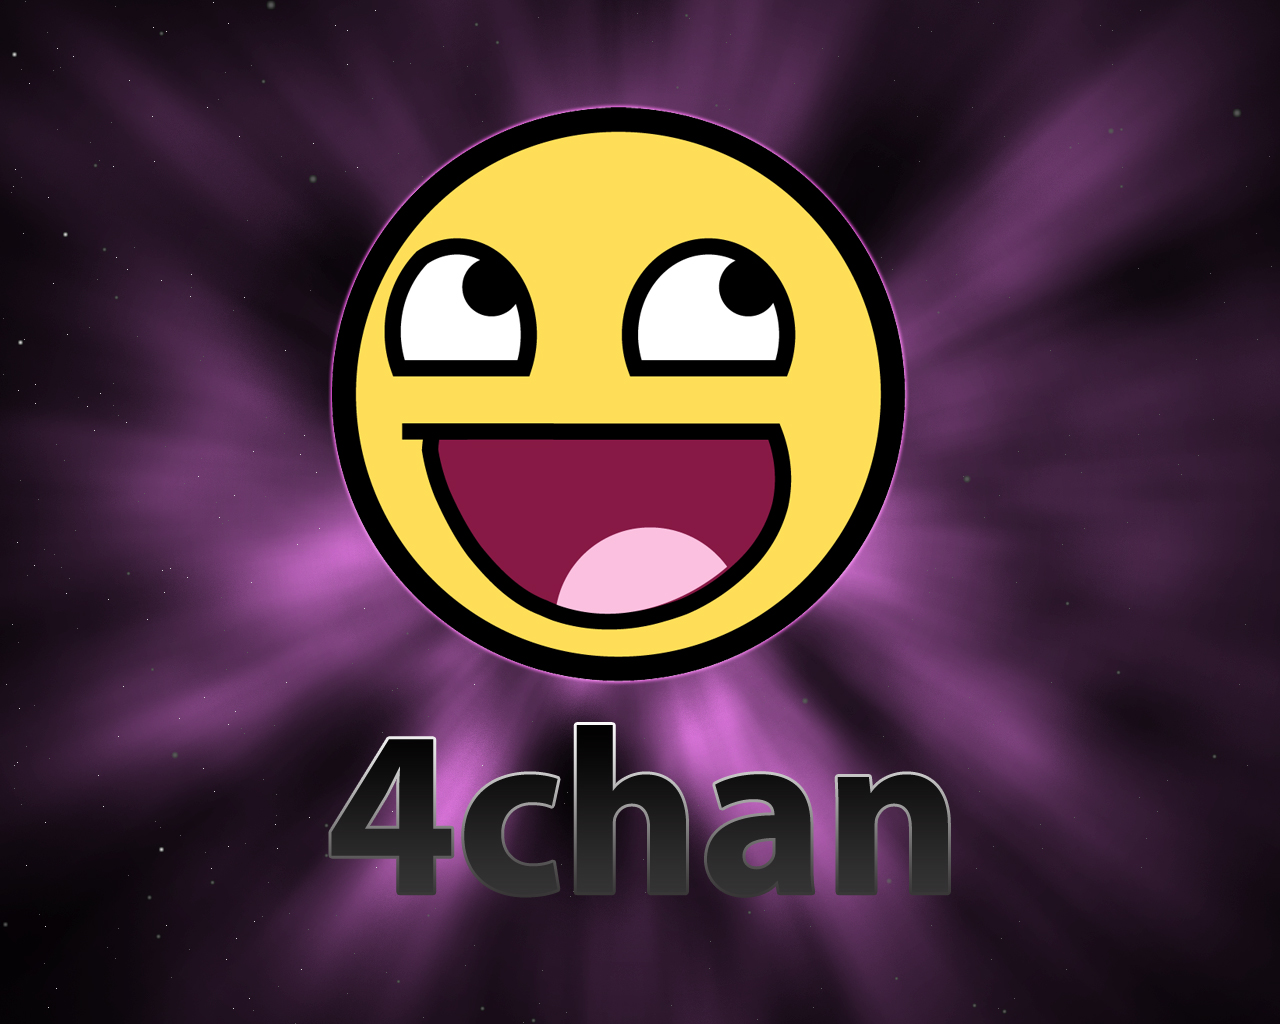 4chan Awesome Wallpaper Face